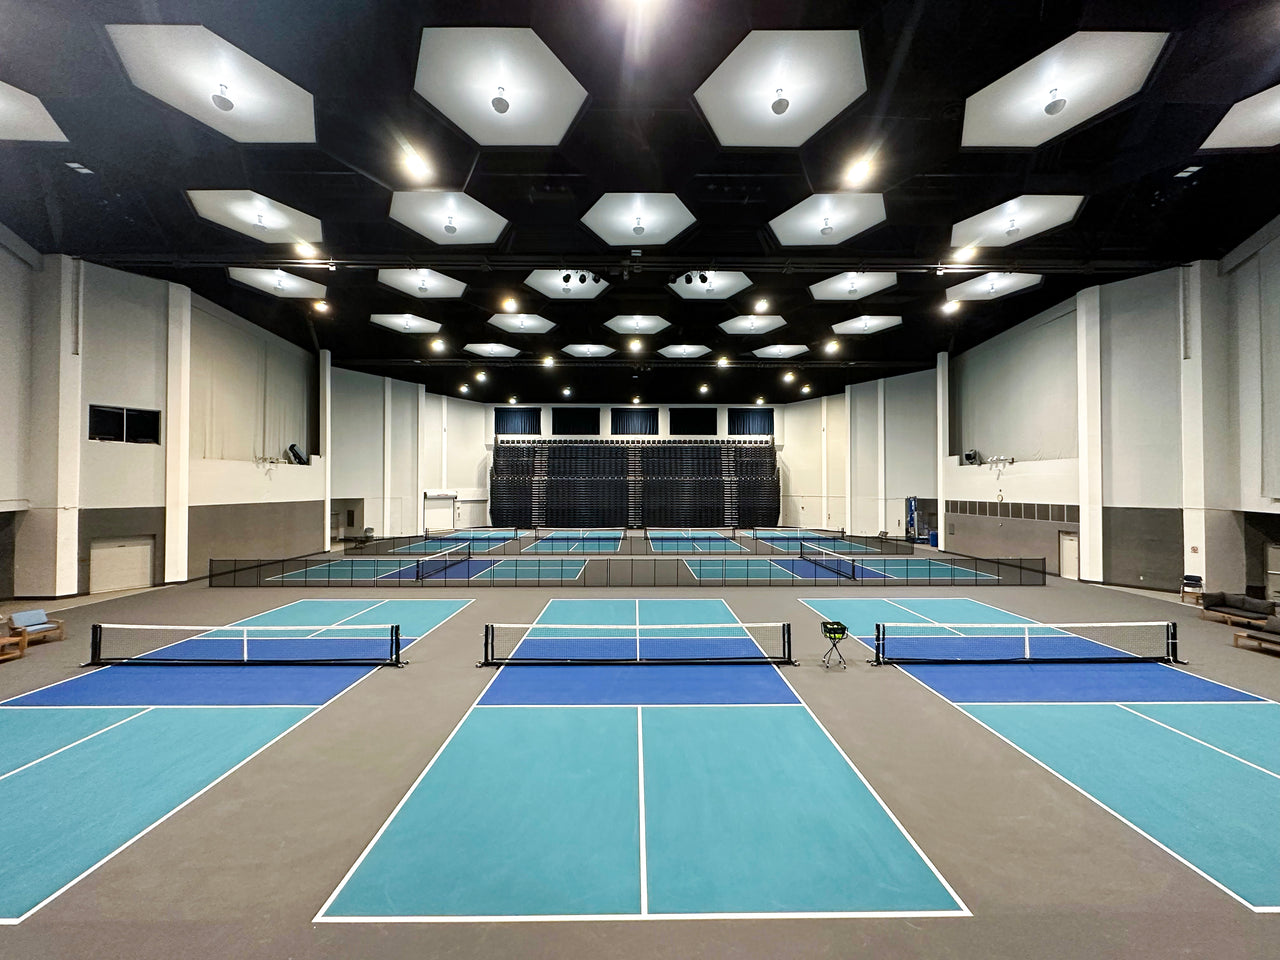 Diadem Sports and Broward College Partner to Open 9-Court Indoor Pickleball Facility